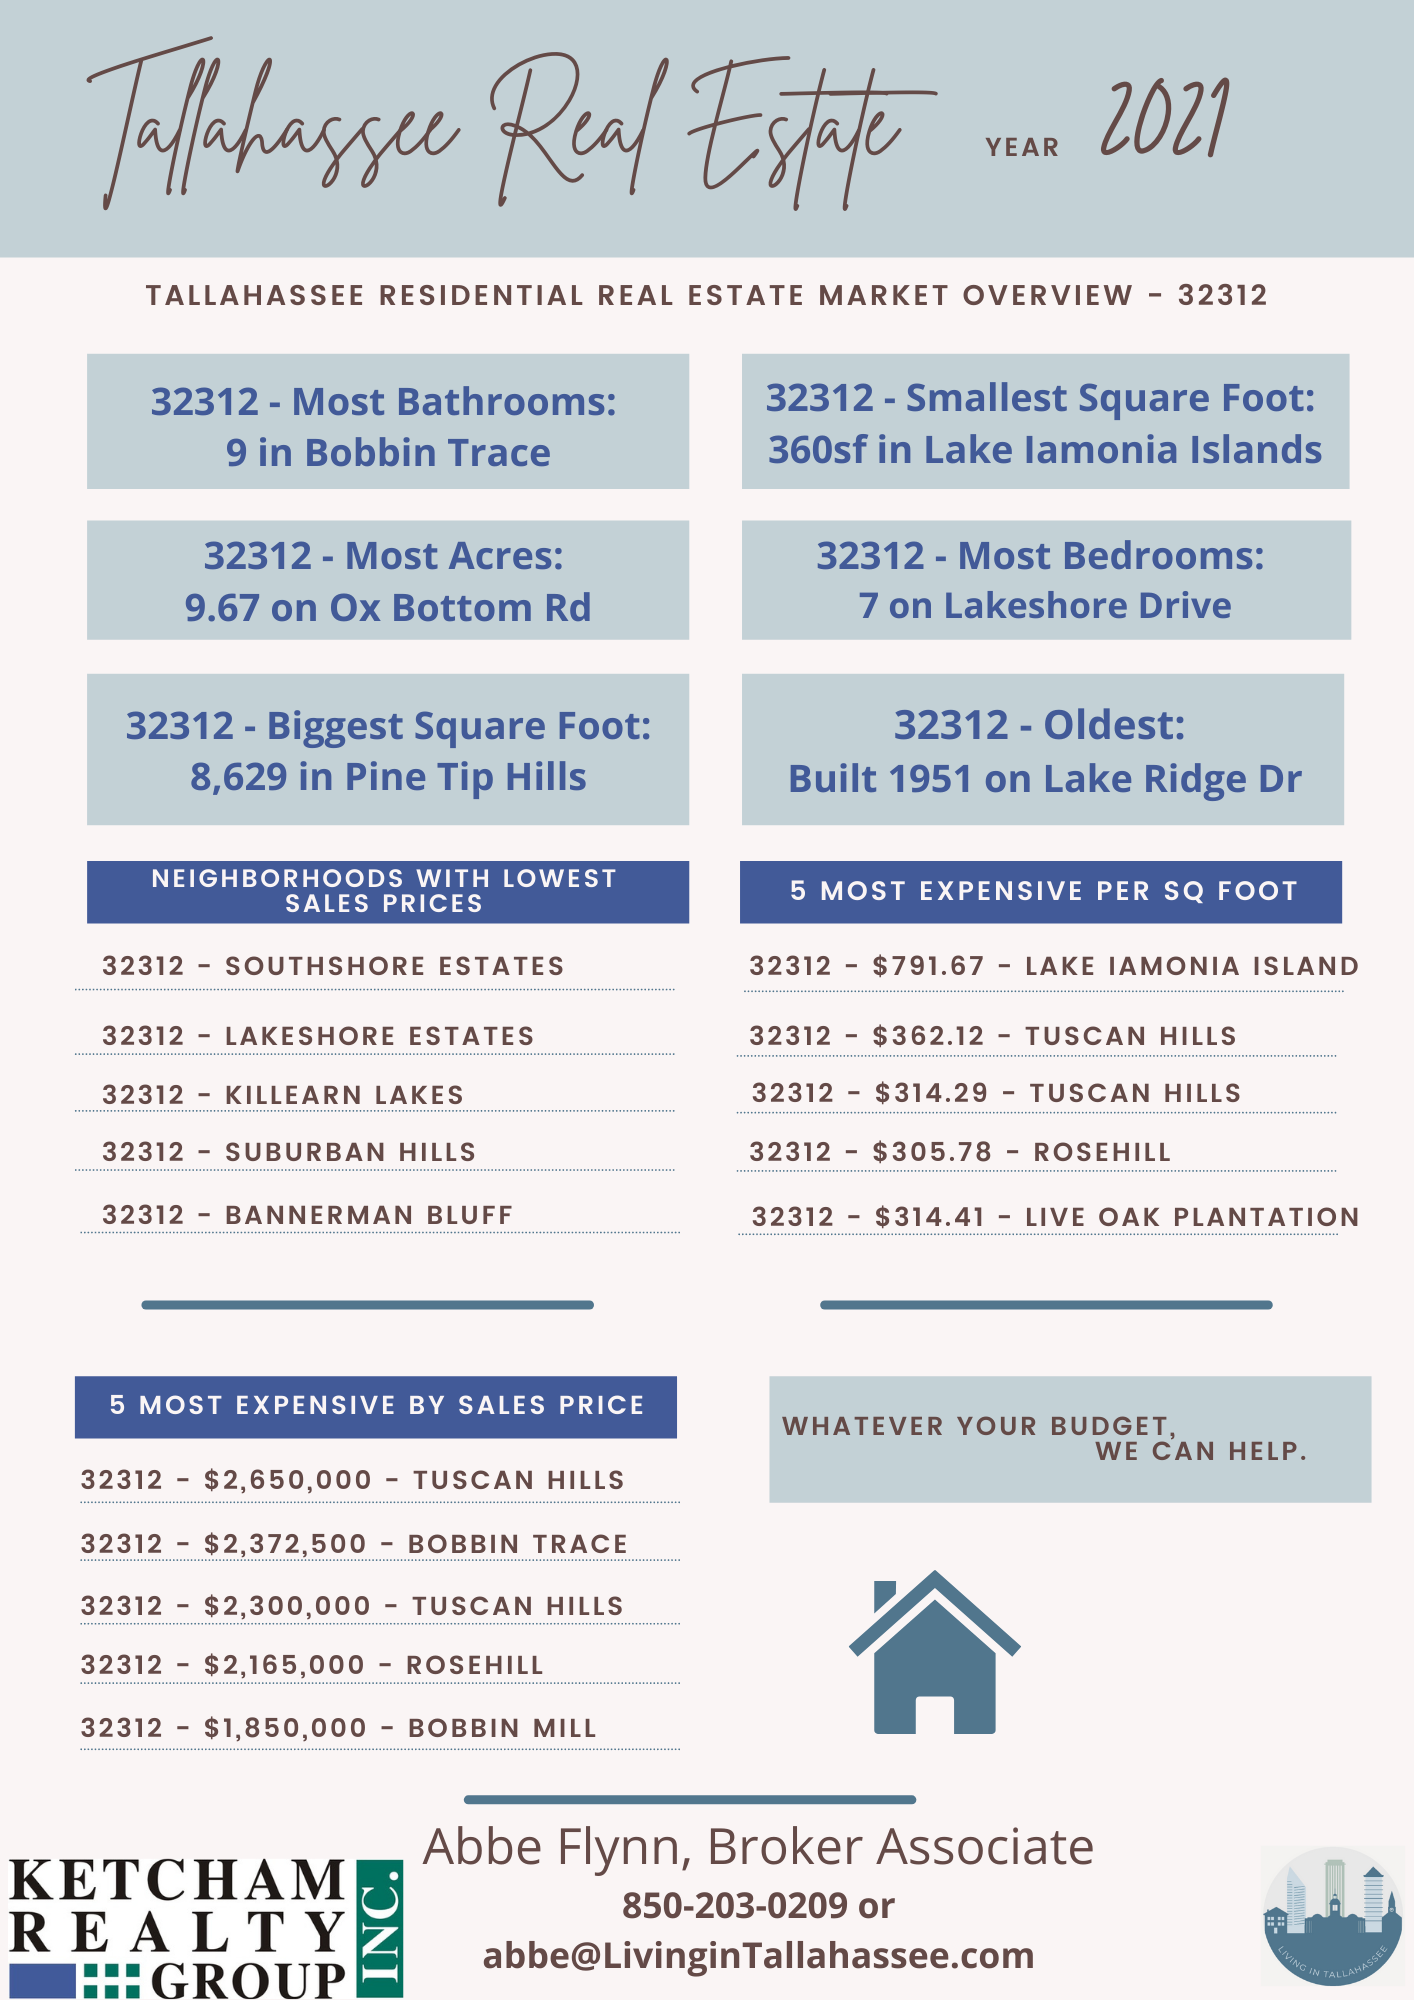 Overview of real estate sold in the Tallahassee zip code of 32312 in the year 2021. Most bathrooms of 9 was sold in Bobbin Trace. Smallest square foot of 360sf was sold in Lake Iamonia Islands. Most acres of 9.67 was sold on Ox Bottom Road. Most bedrooms of 7 was sold on Lakeshore Drive. Biggest square footages of 8,629sf was sold in Pine Tip Hills. The oldest was built 1951 and located on Lake Ridge Drive.